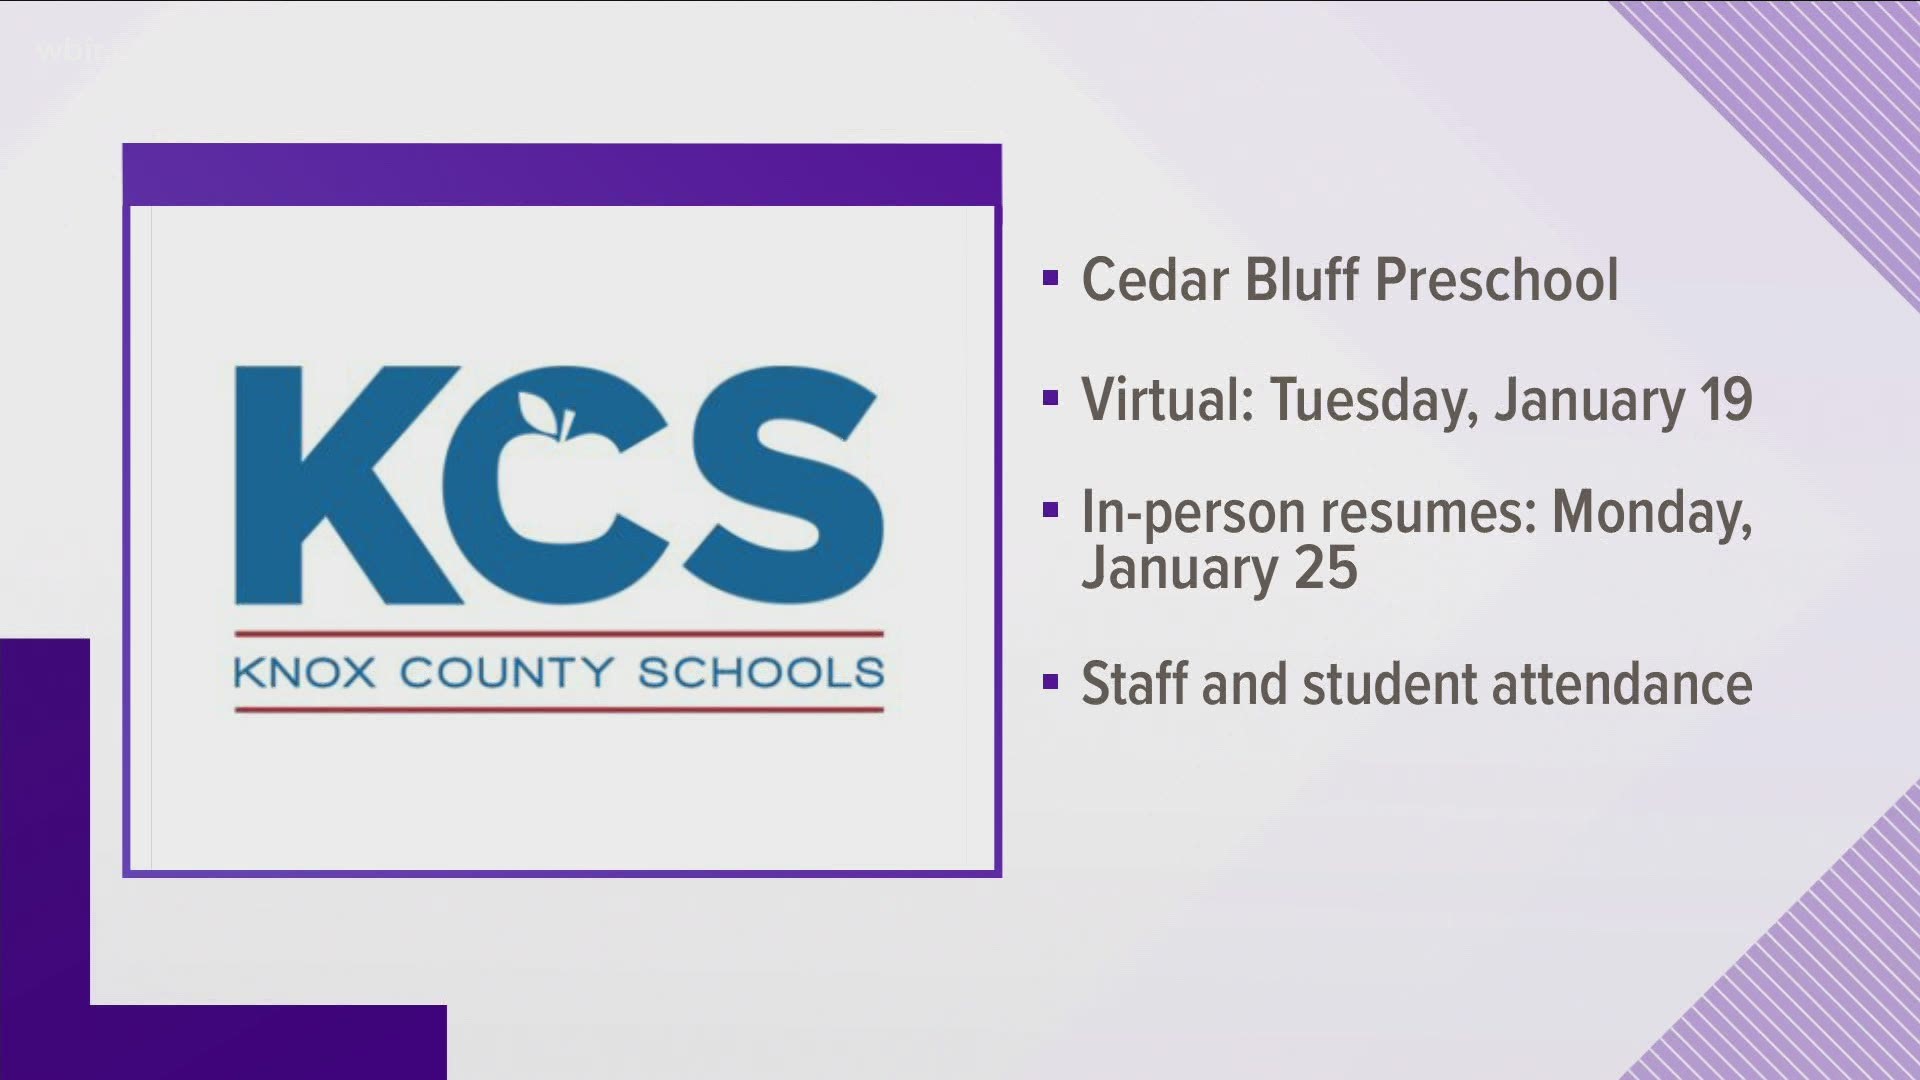 KCS says in person instruction will start again on Monday, January 25.